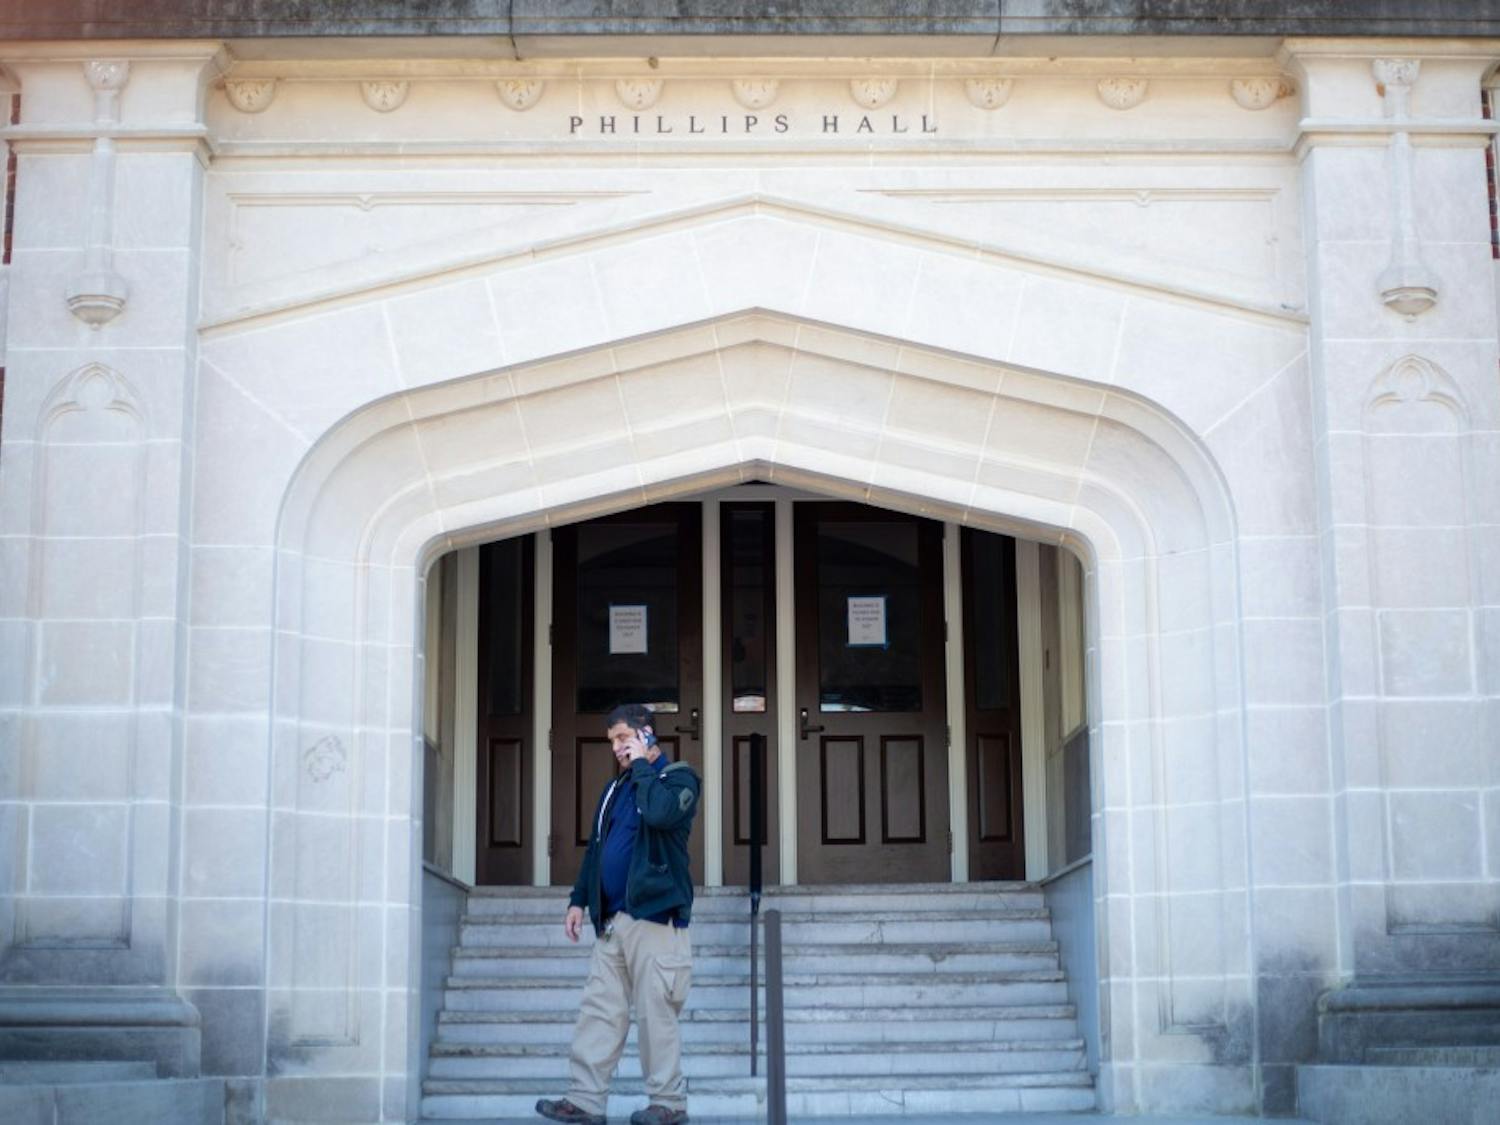 Chris Moore, a utility worker at UNC, takes a phone call outside Phillips Hall where he is on duty to inform students not to enter on April 3, 2019 due to flooding and a power outage.